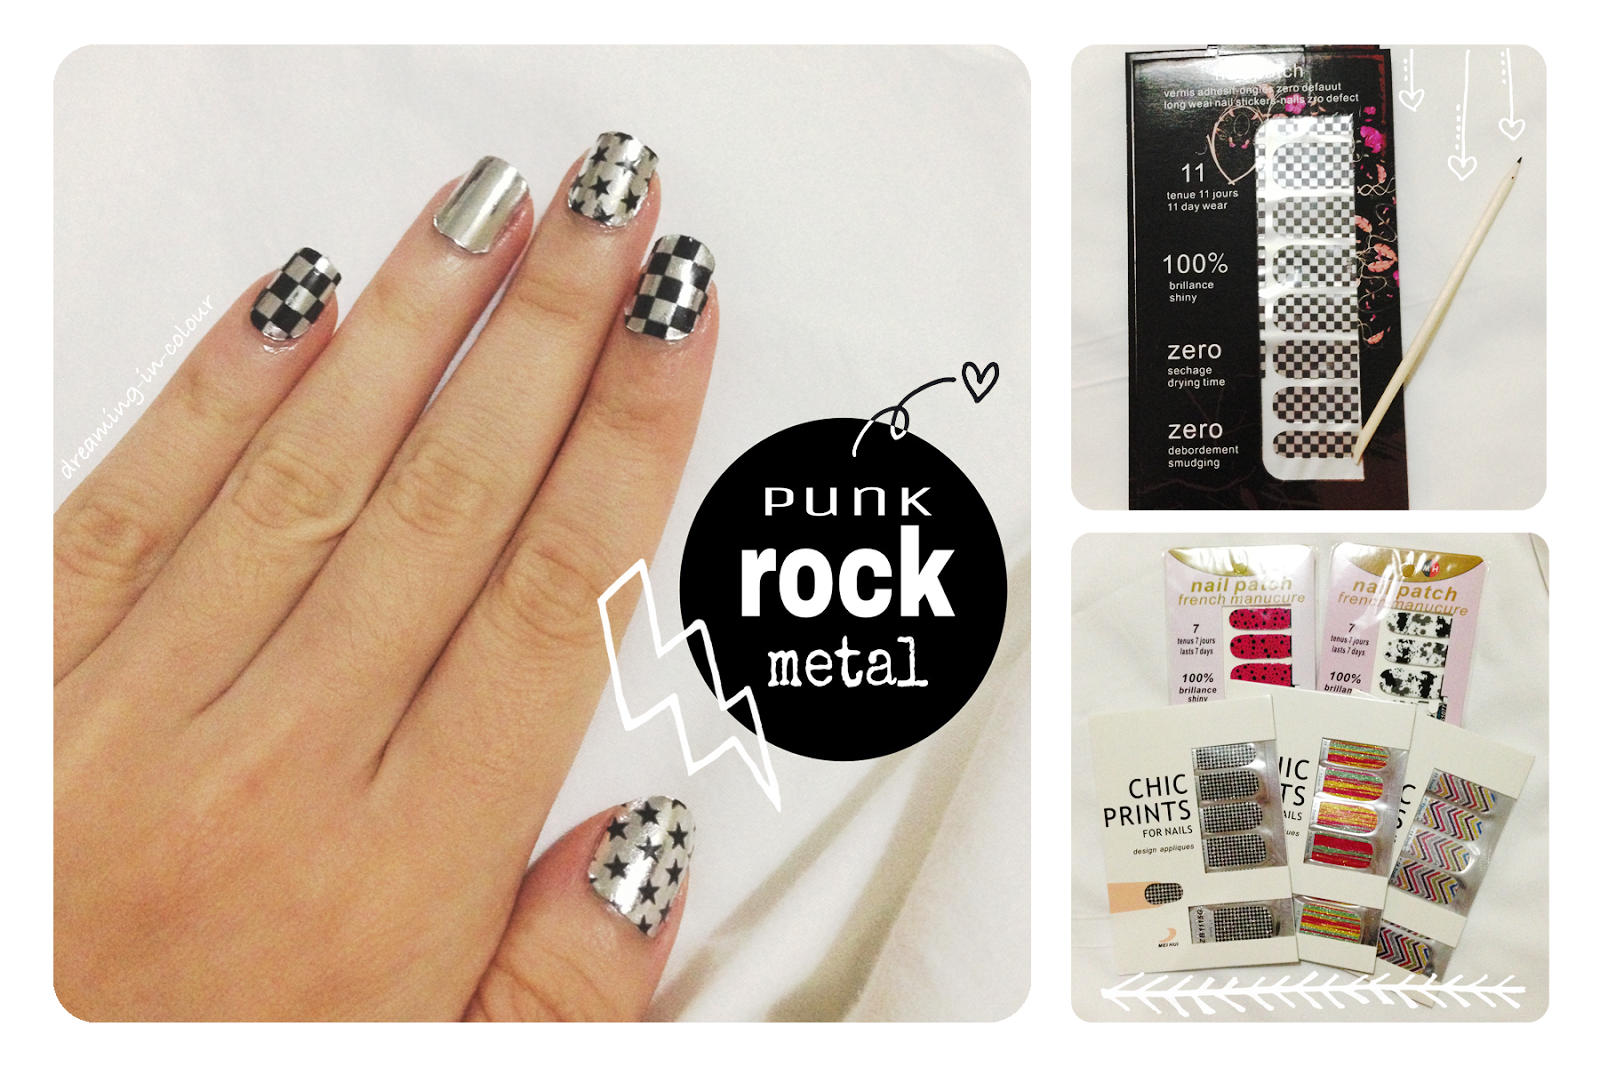 2. "Edgy Nail Designs for Punk Rockers" - wide 7